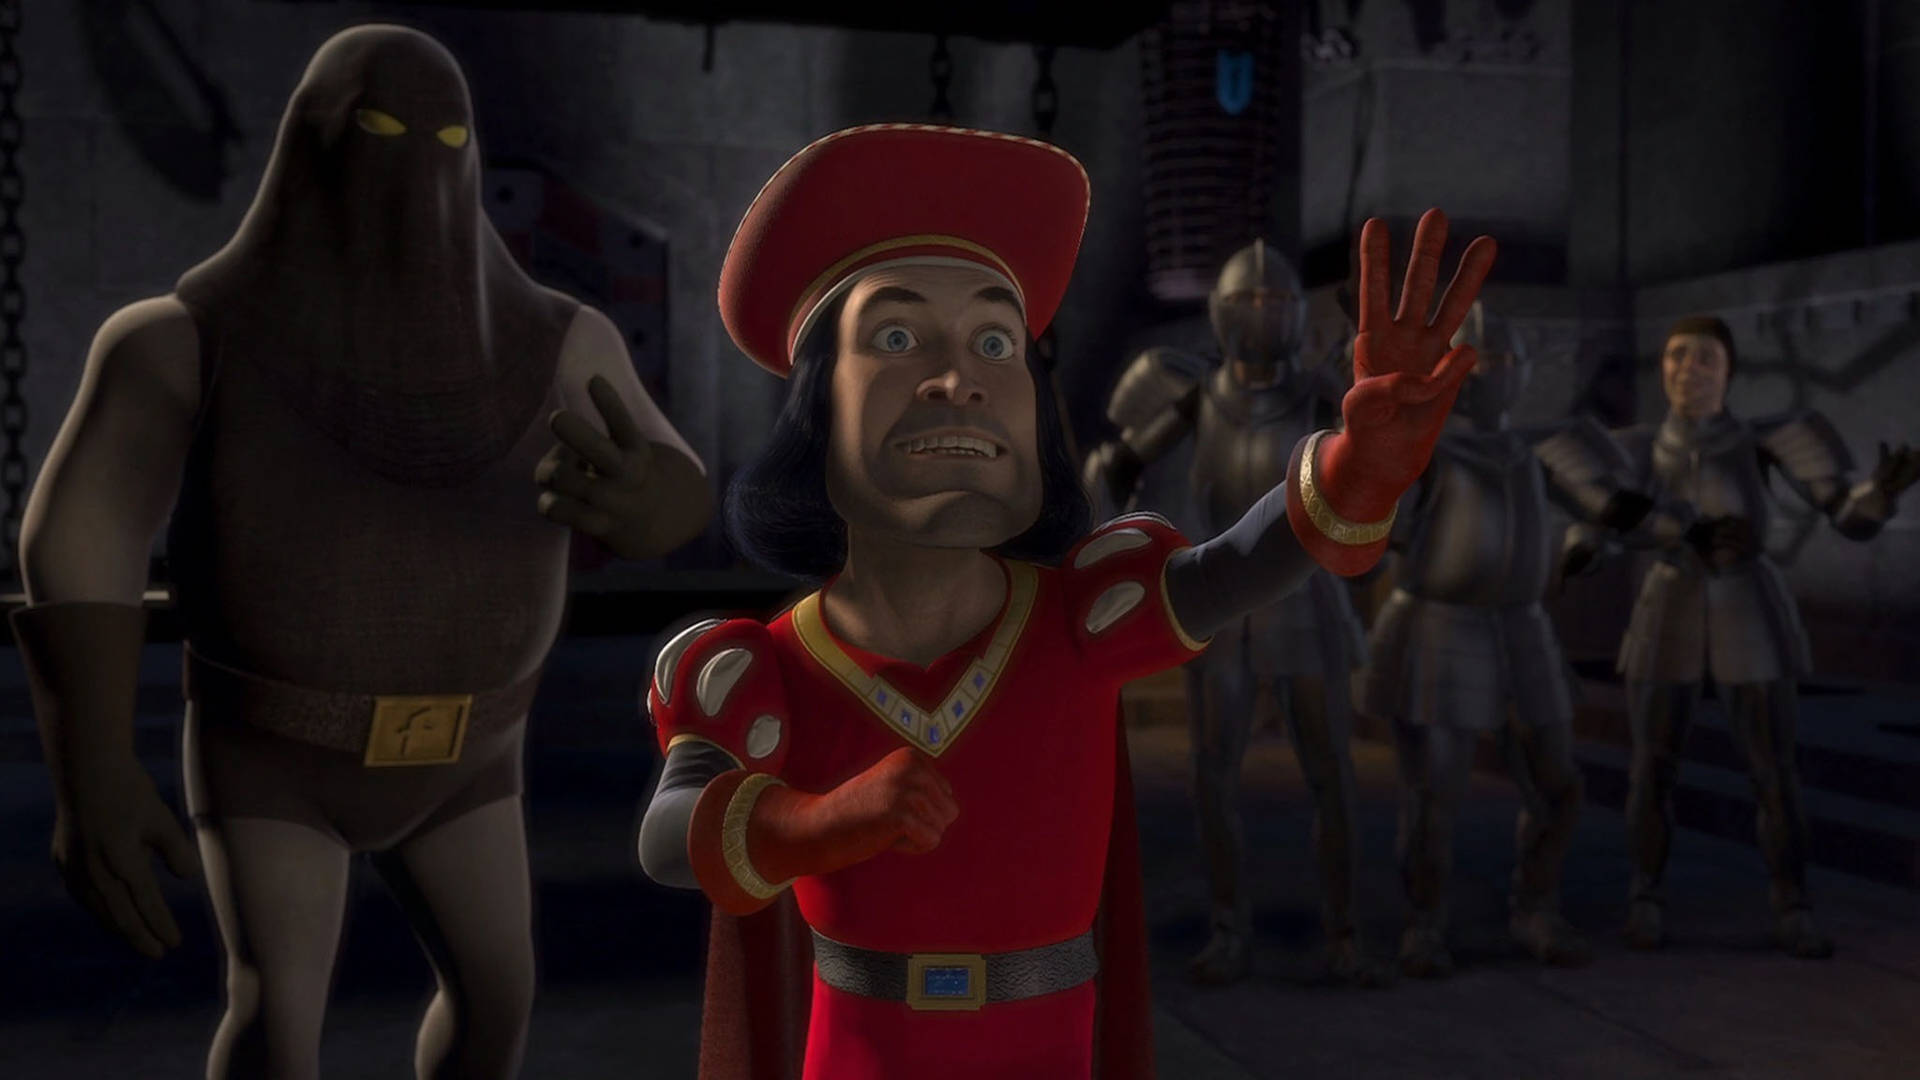 Lordfarquaads Underhuggare (for A Computer Or Mobile Wallpaper That Features Images Of Lord Farquaad's Henchmen) Wallpaper